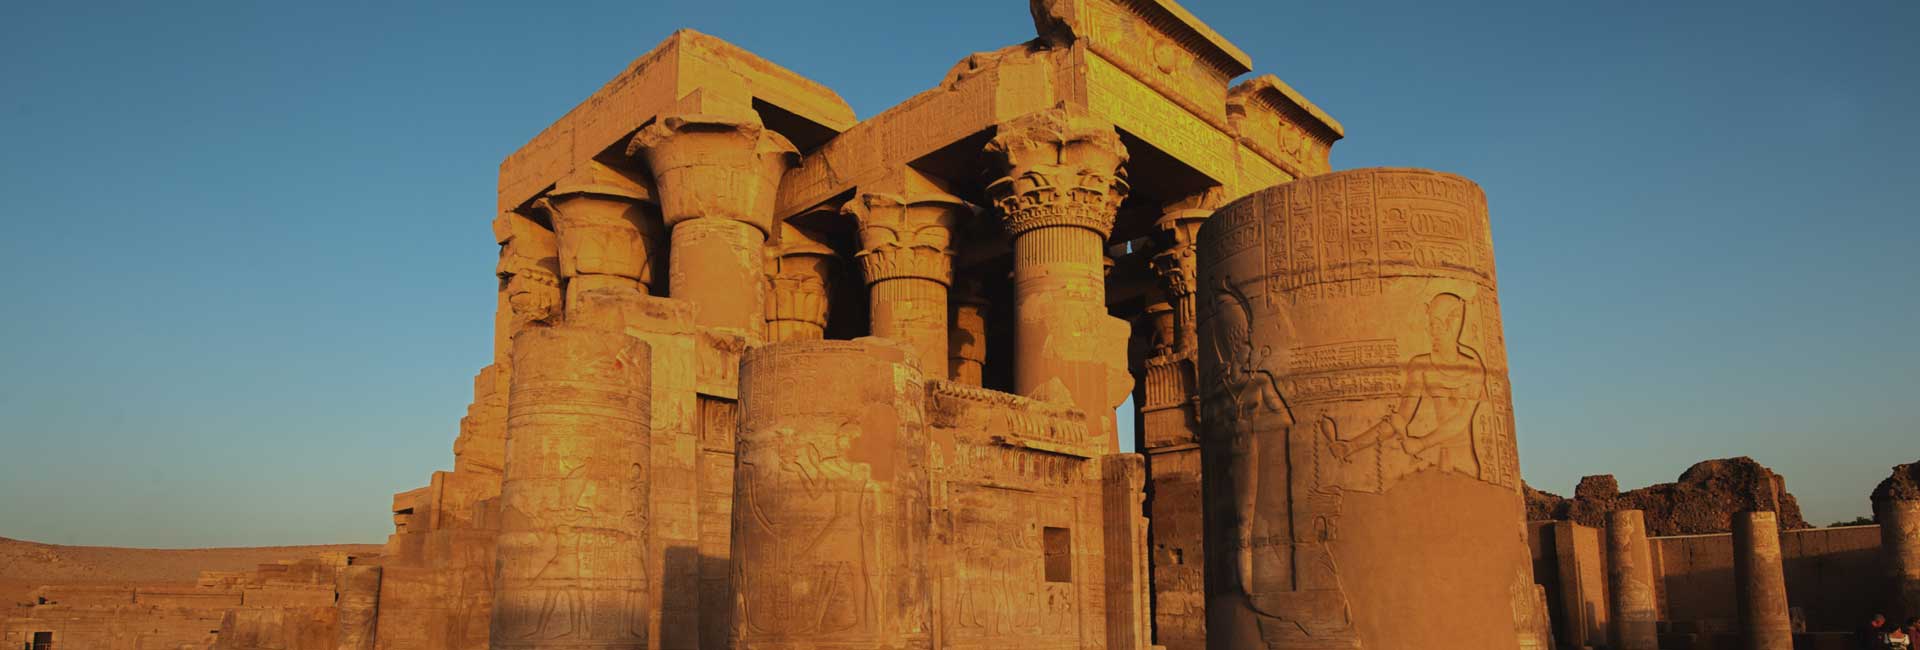 Temple of Kom ombo